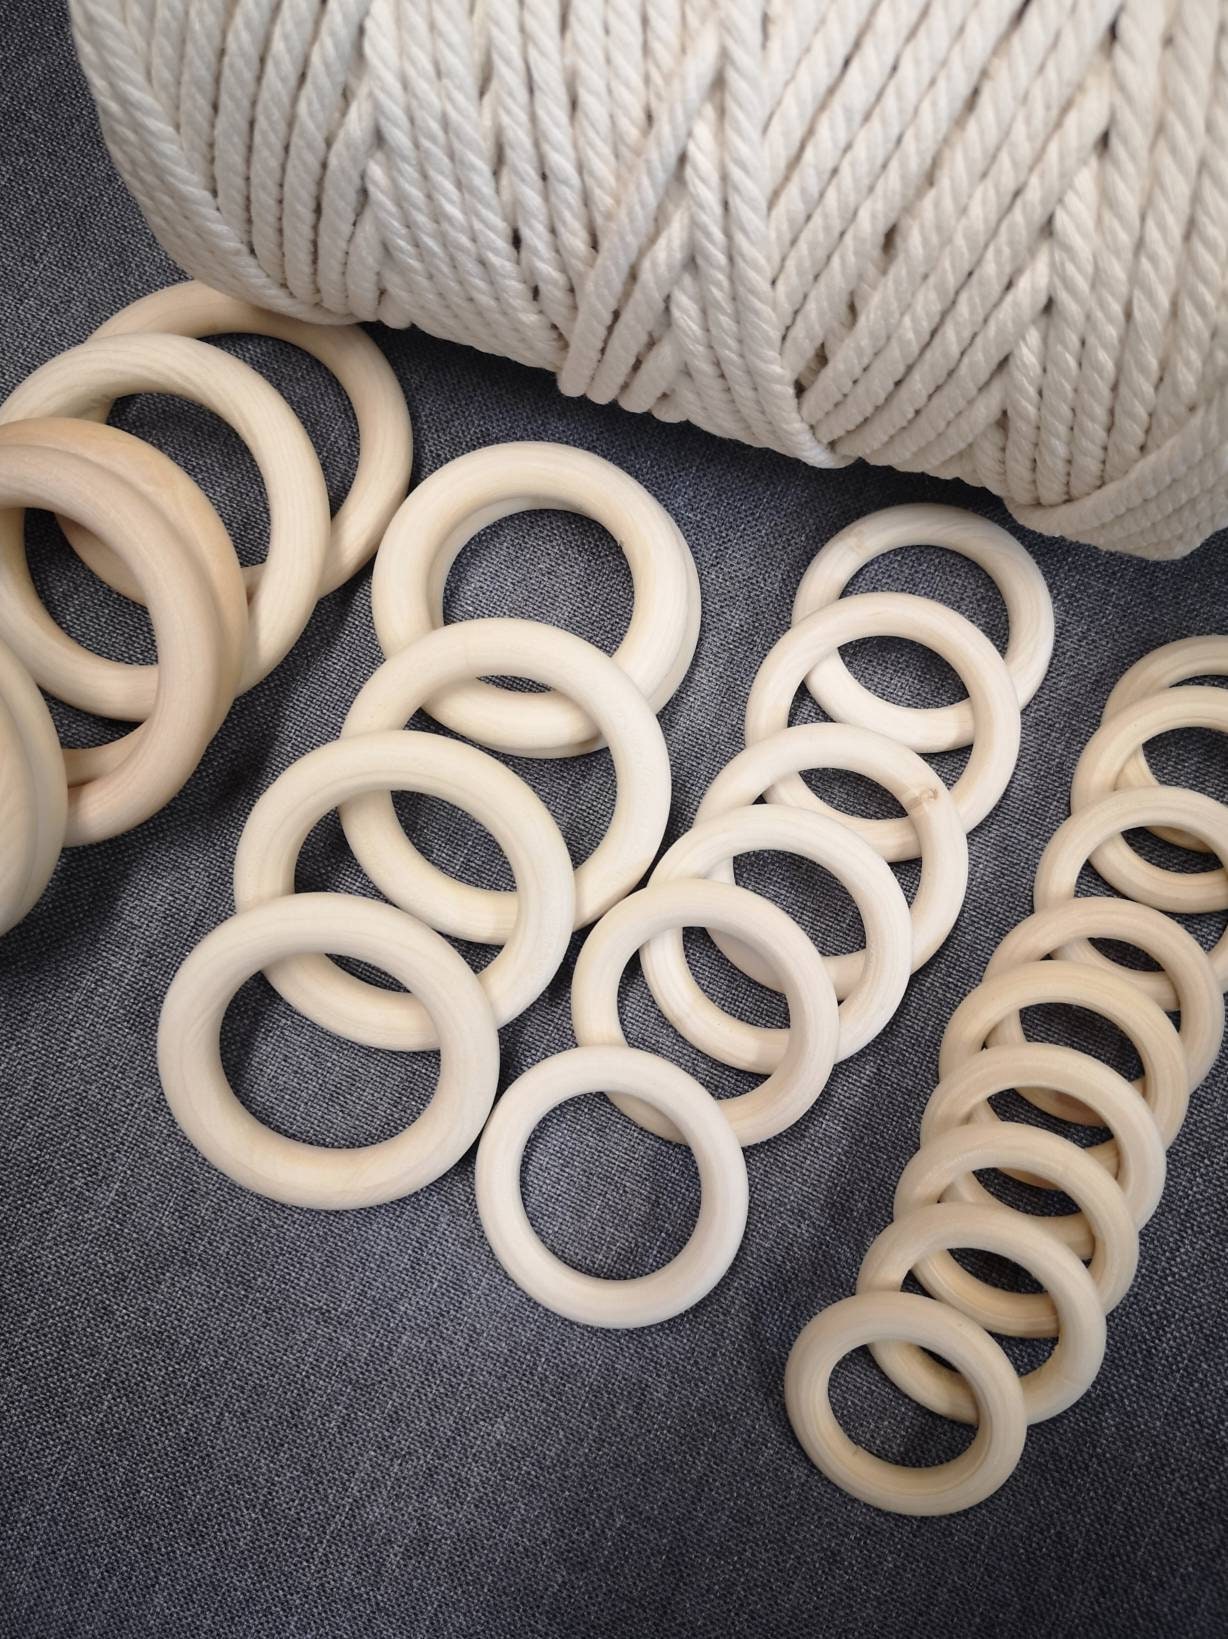 50mm Wooden Rings 